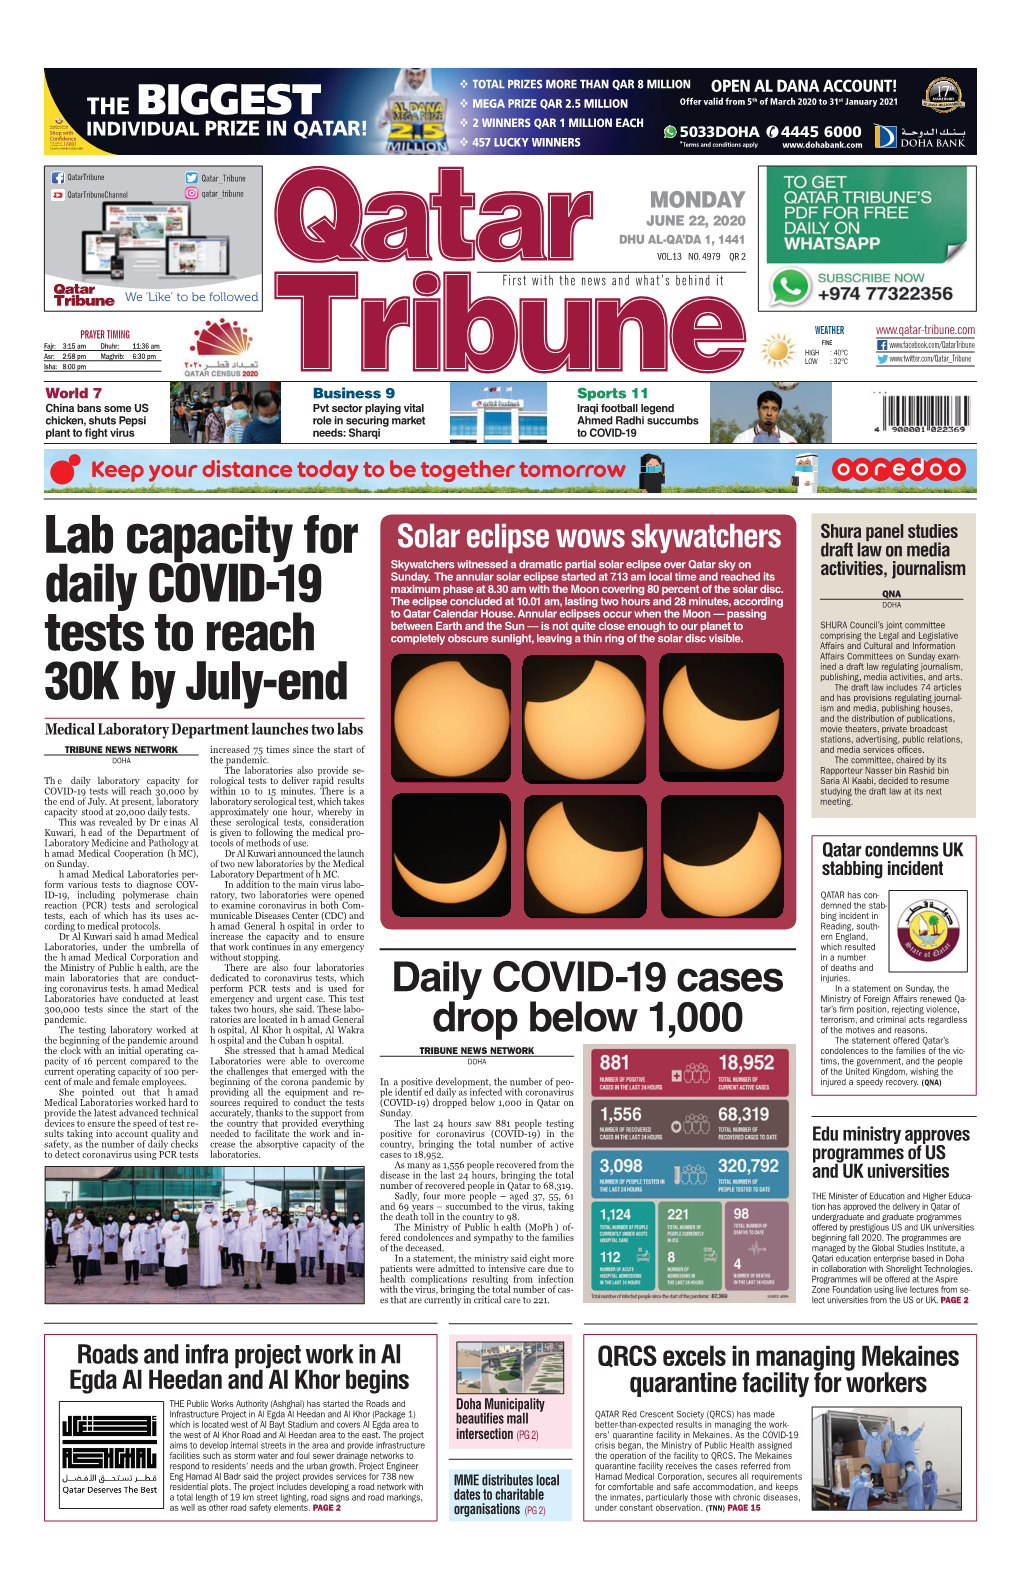 Lab Capacity for Daily COVID-19 Tests to Reach 30K by July-End